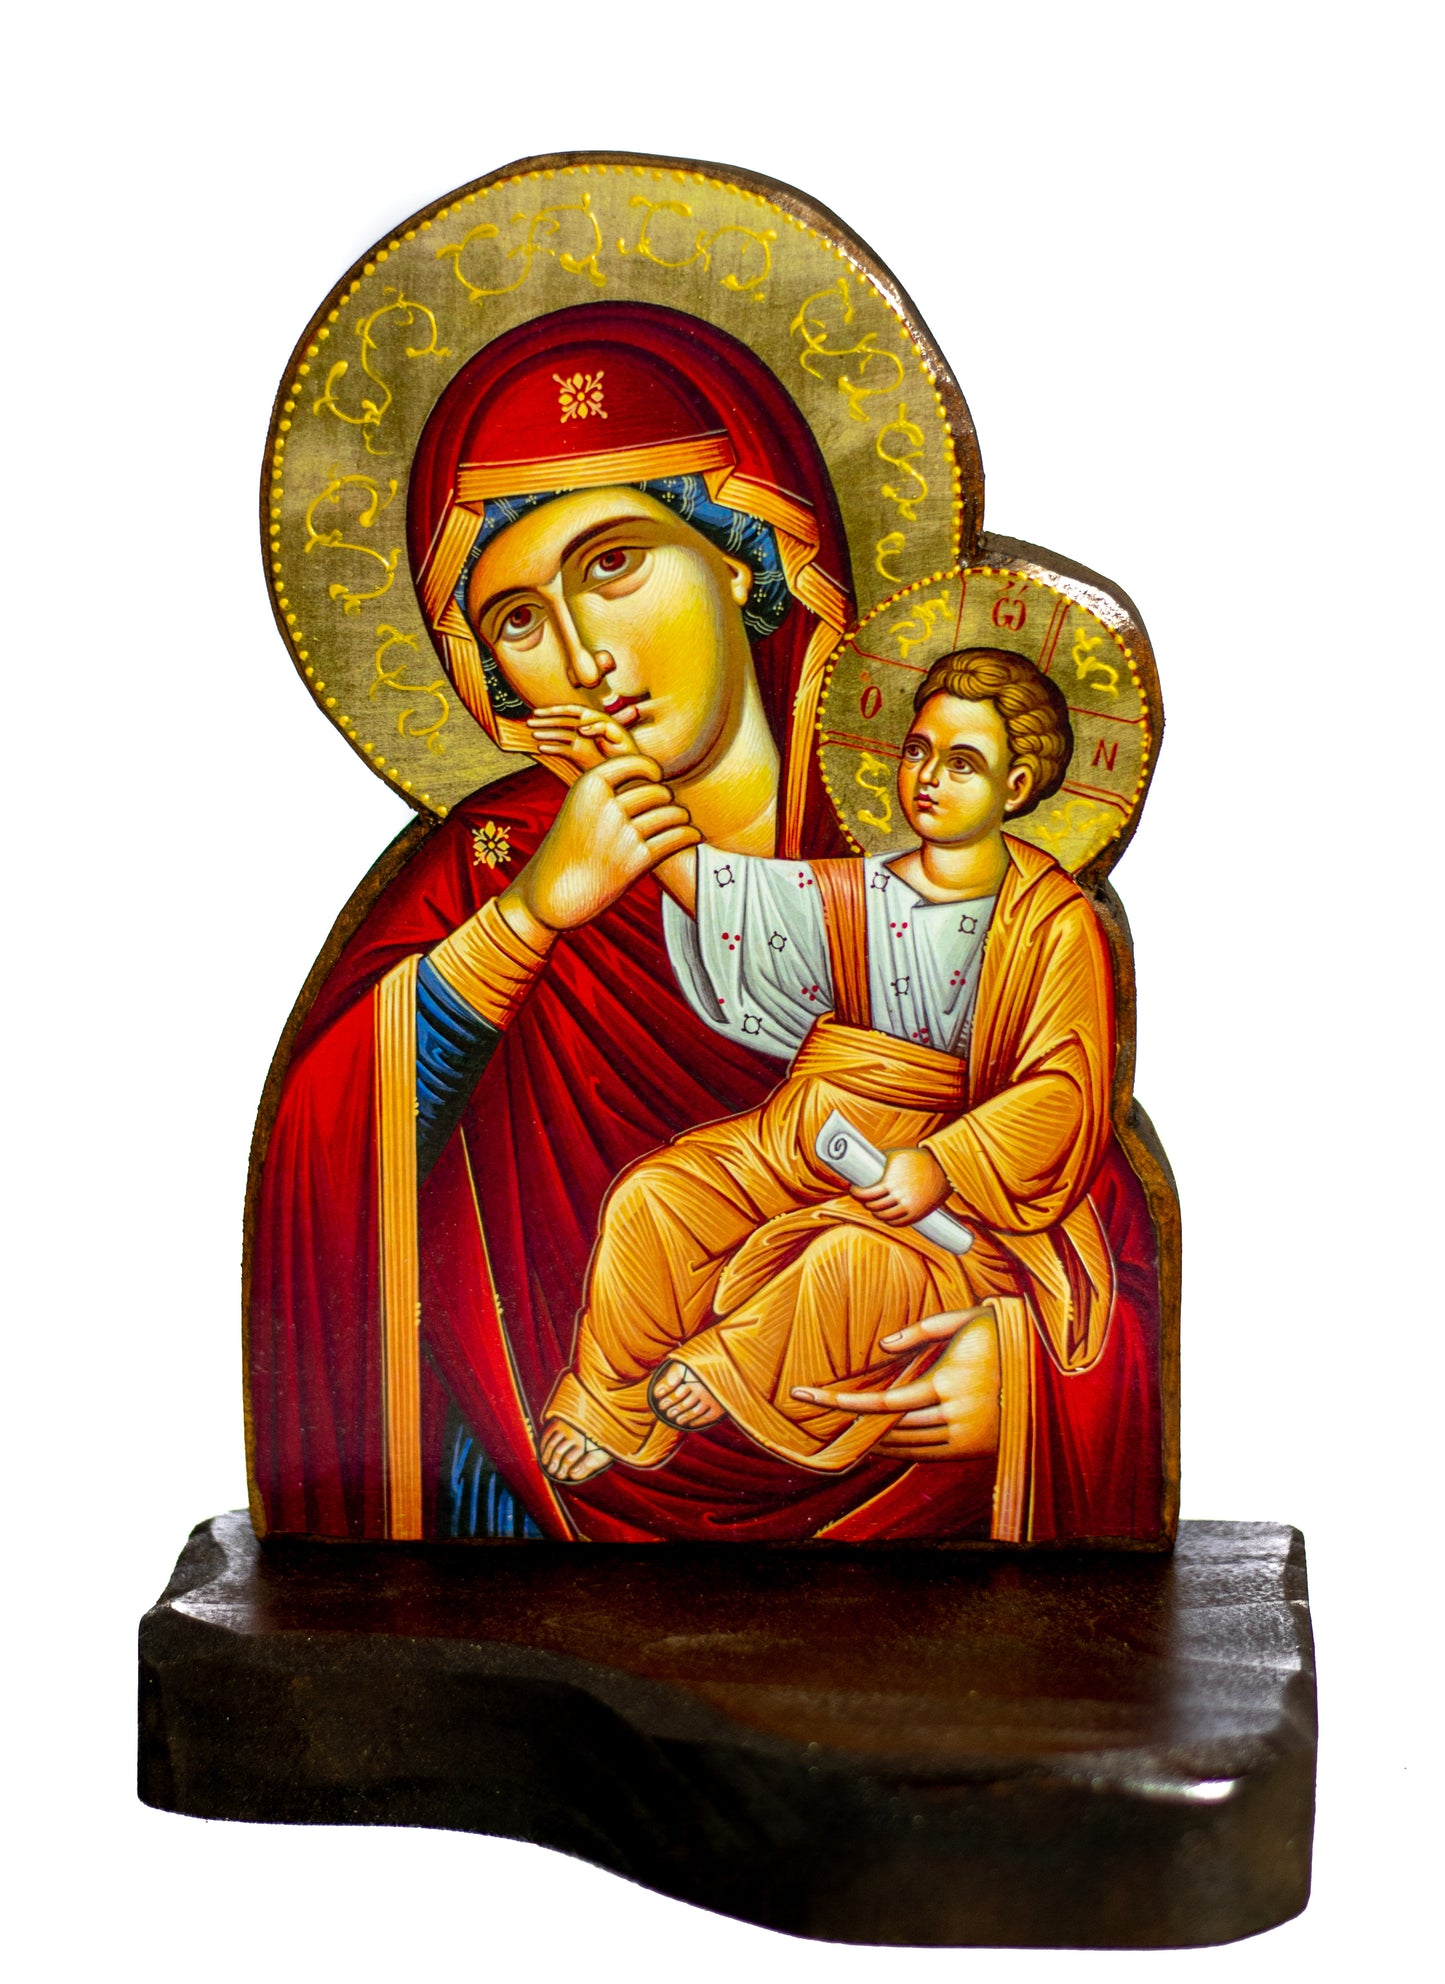 Christian Iconostasis with Holy Virgin Mary 30x22cm, Handmade Orthodox shrine of Our Lady, Byzantine altar wall hanging wood plaque TheHolyArt